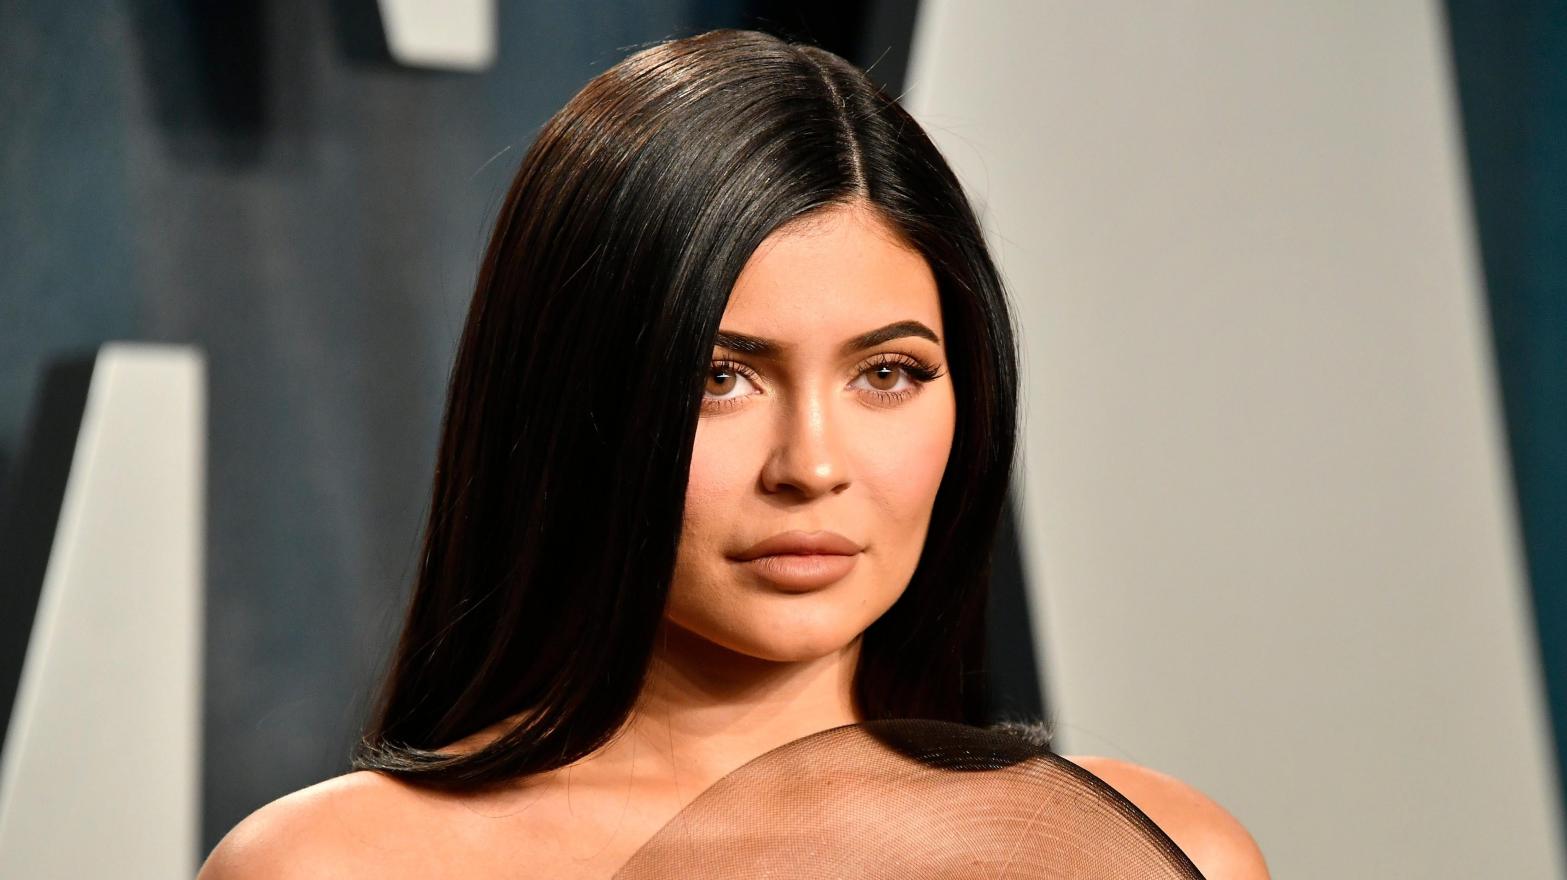 Kylie Jenner judging Instagram execs for trying to turn the app into TikTok. (Photo: Frazer Harrison, Getty Images)